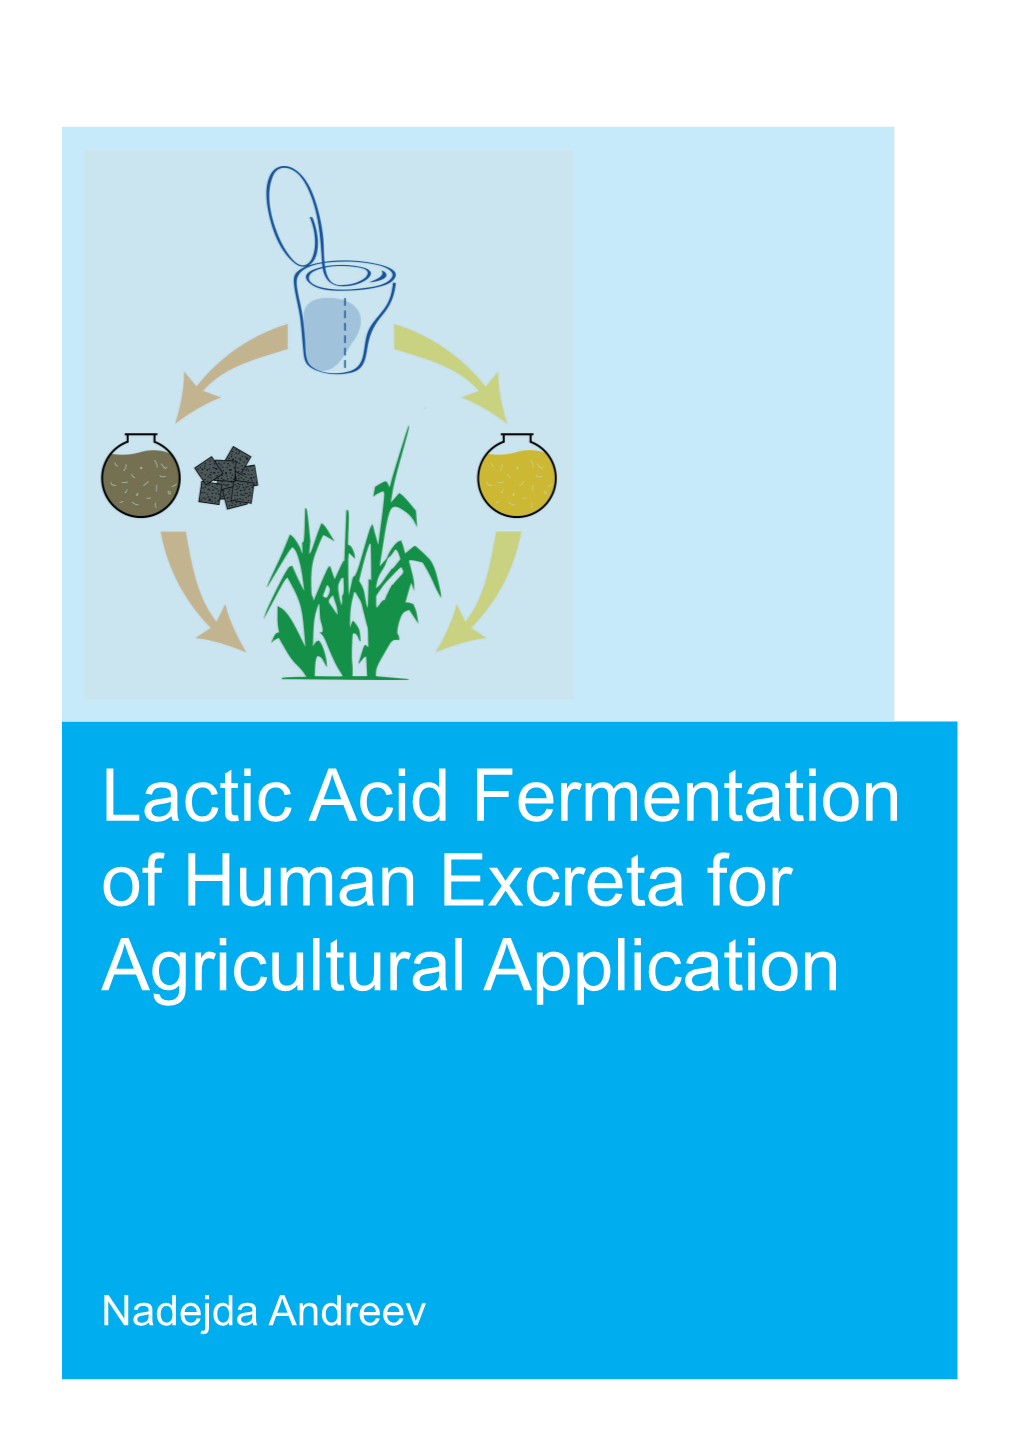 Lactic Acid Fermentation of Human Excreta for Agricultural Application